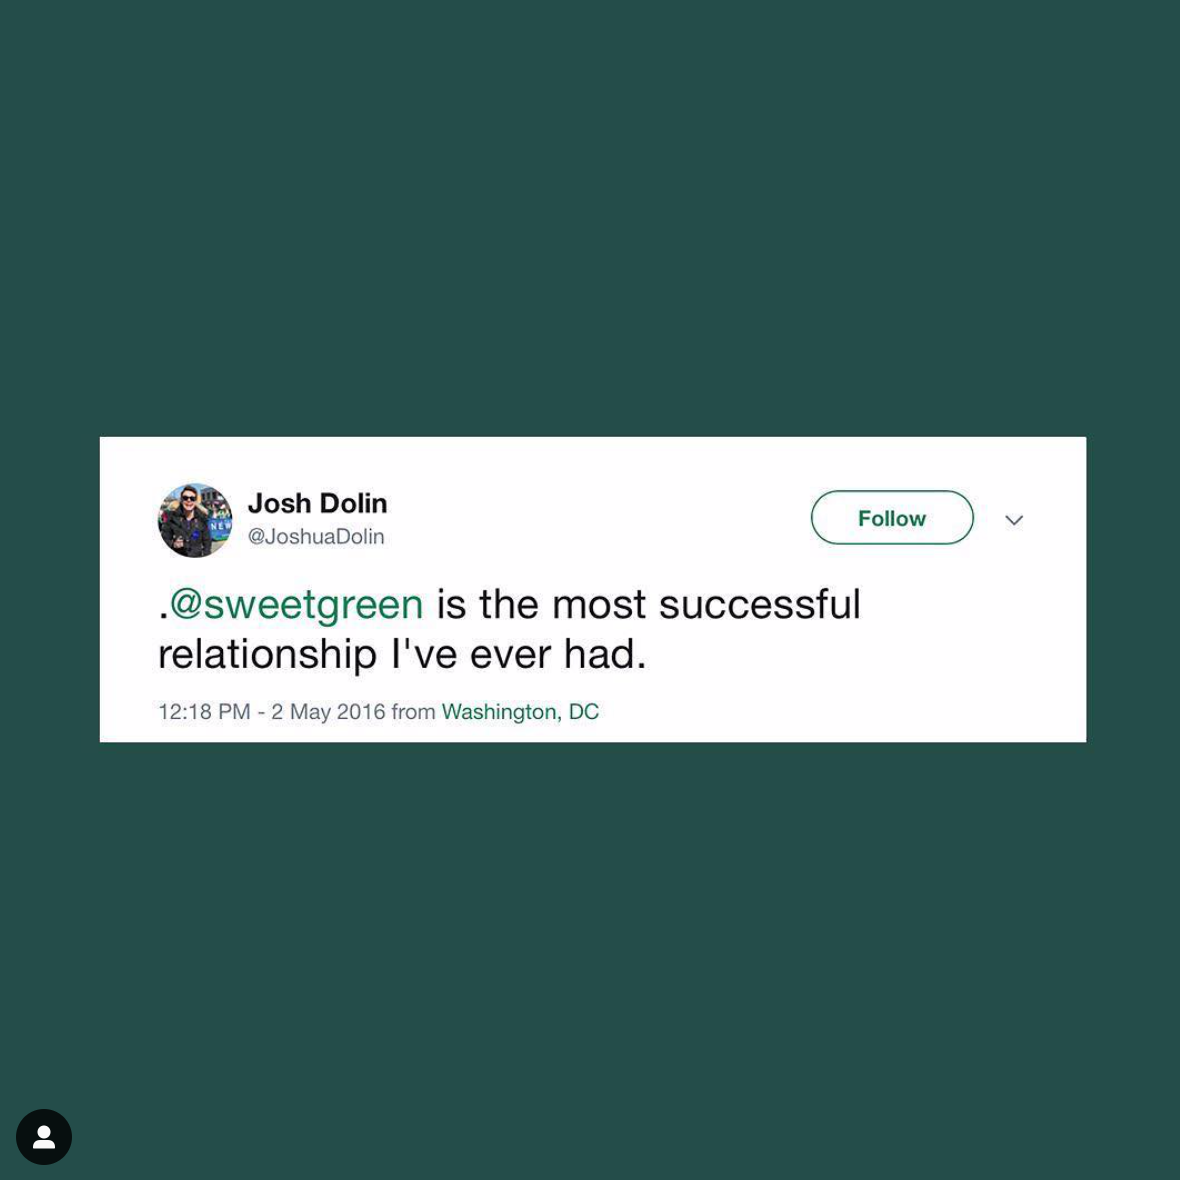 Tweet that reads “Sweetgreen is the most successful relationship I’ve ever had.”